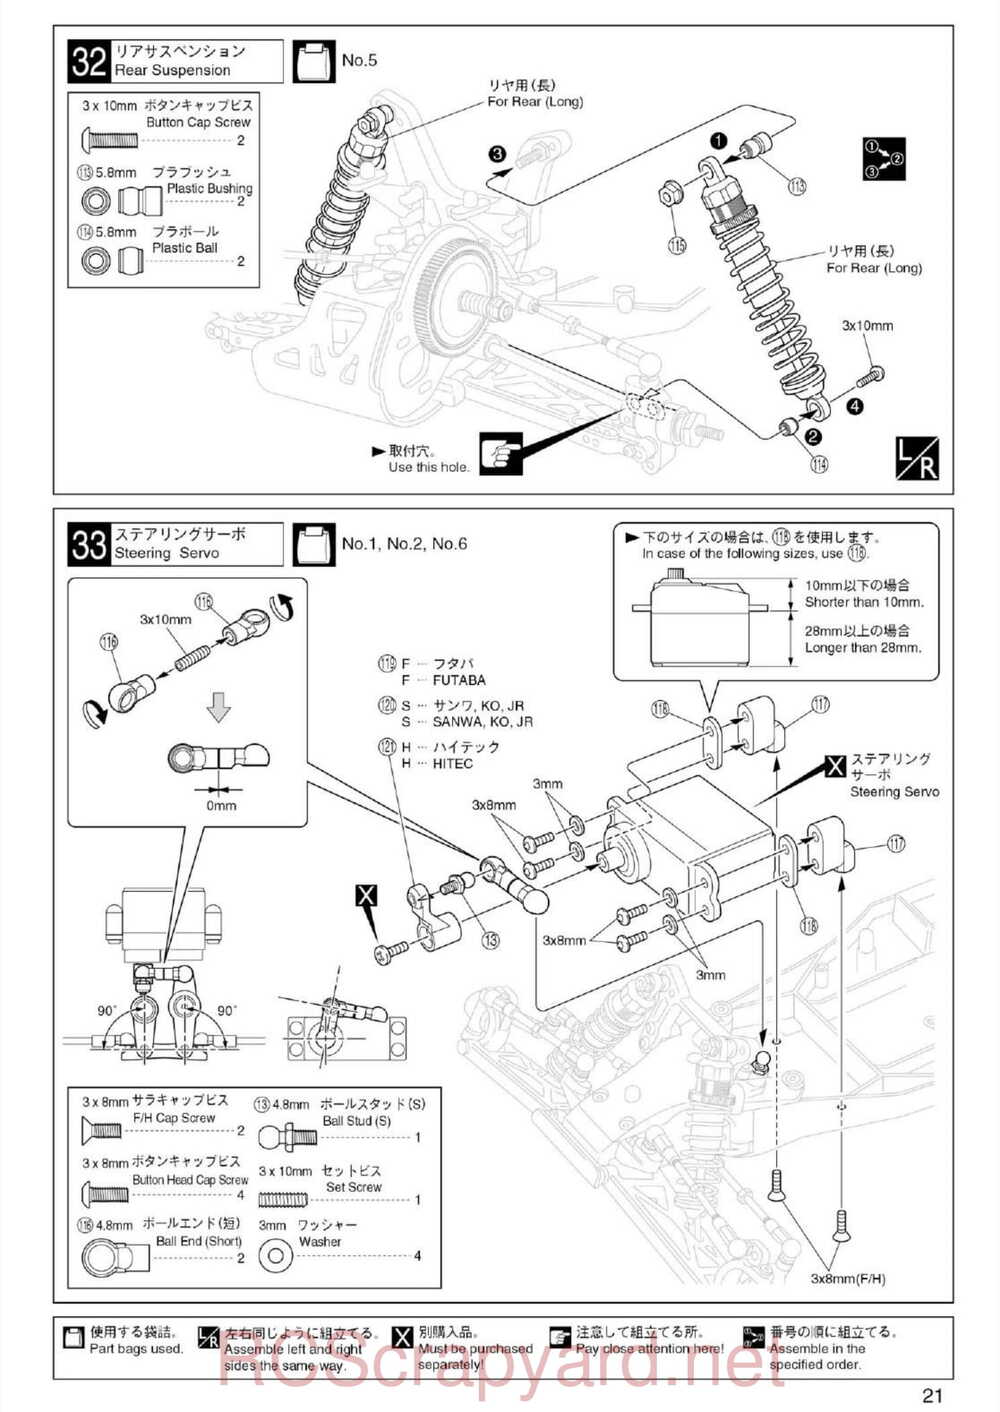 Kyosho - 30074 - Ultima-RB5 - Manual - Page 21